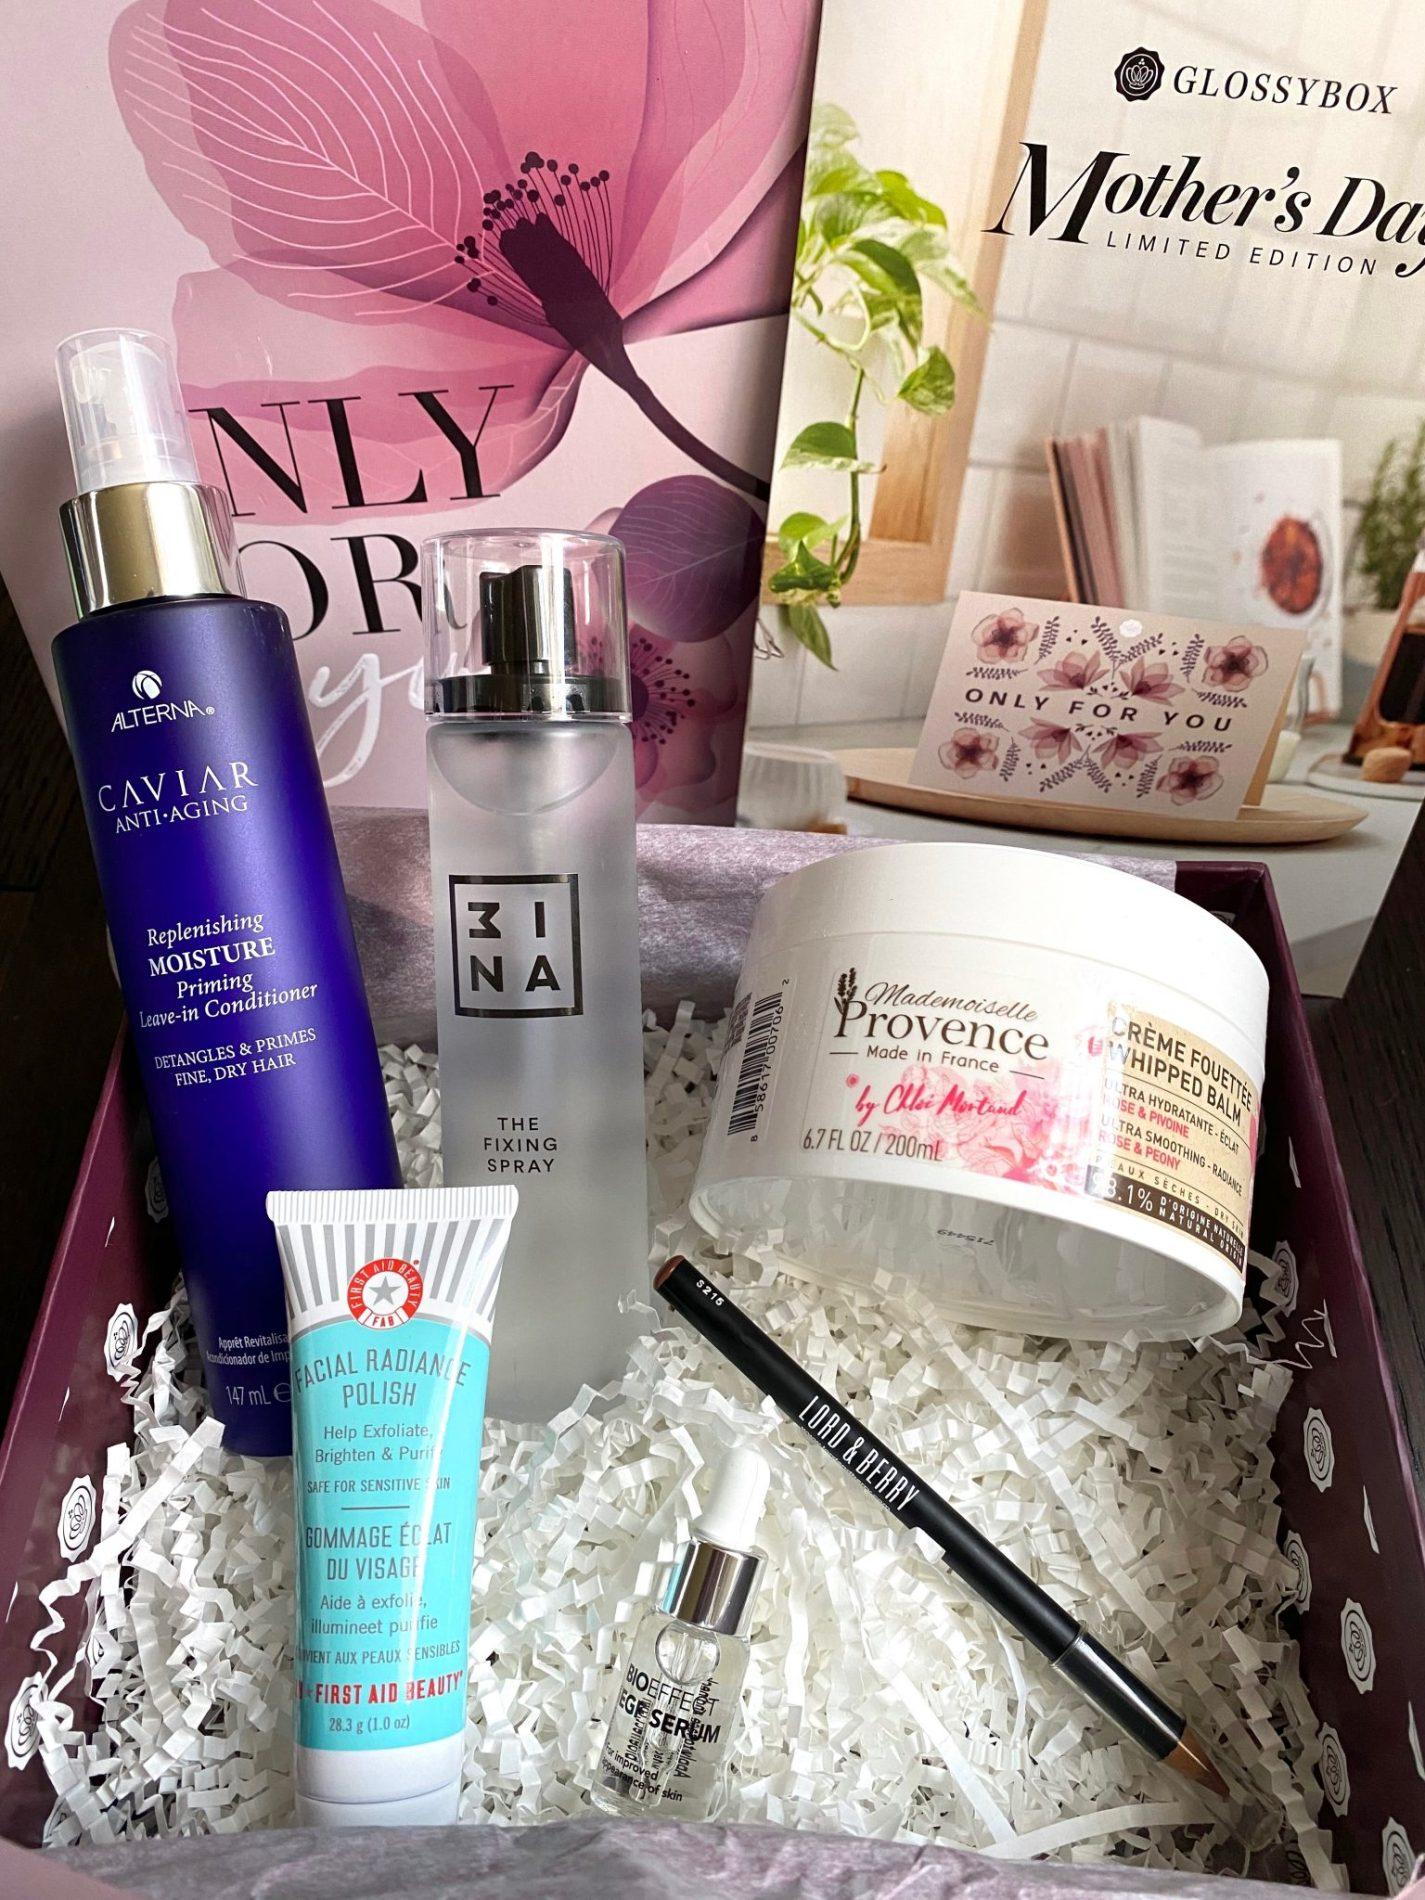 GLOSSYBOX Limited Edition Mother’s Day Box Review